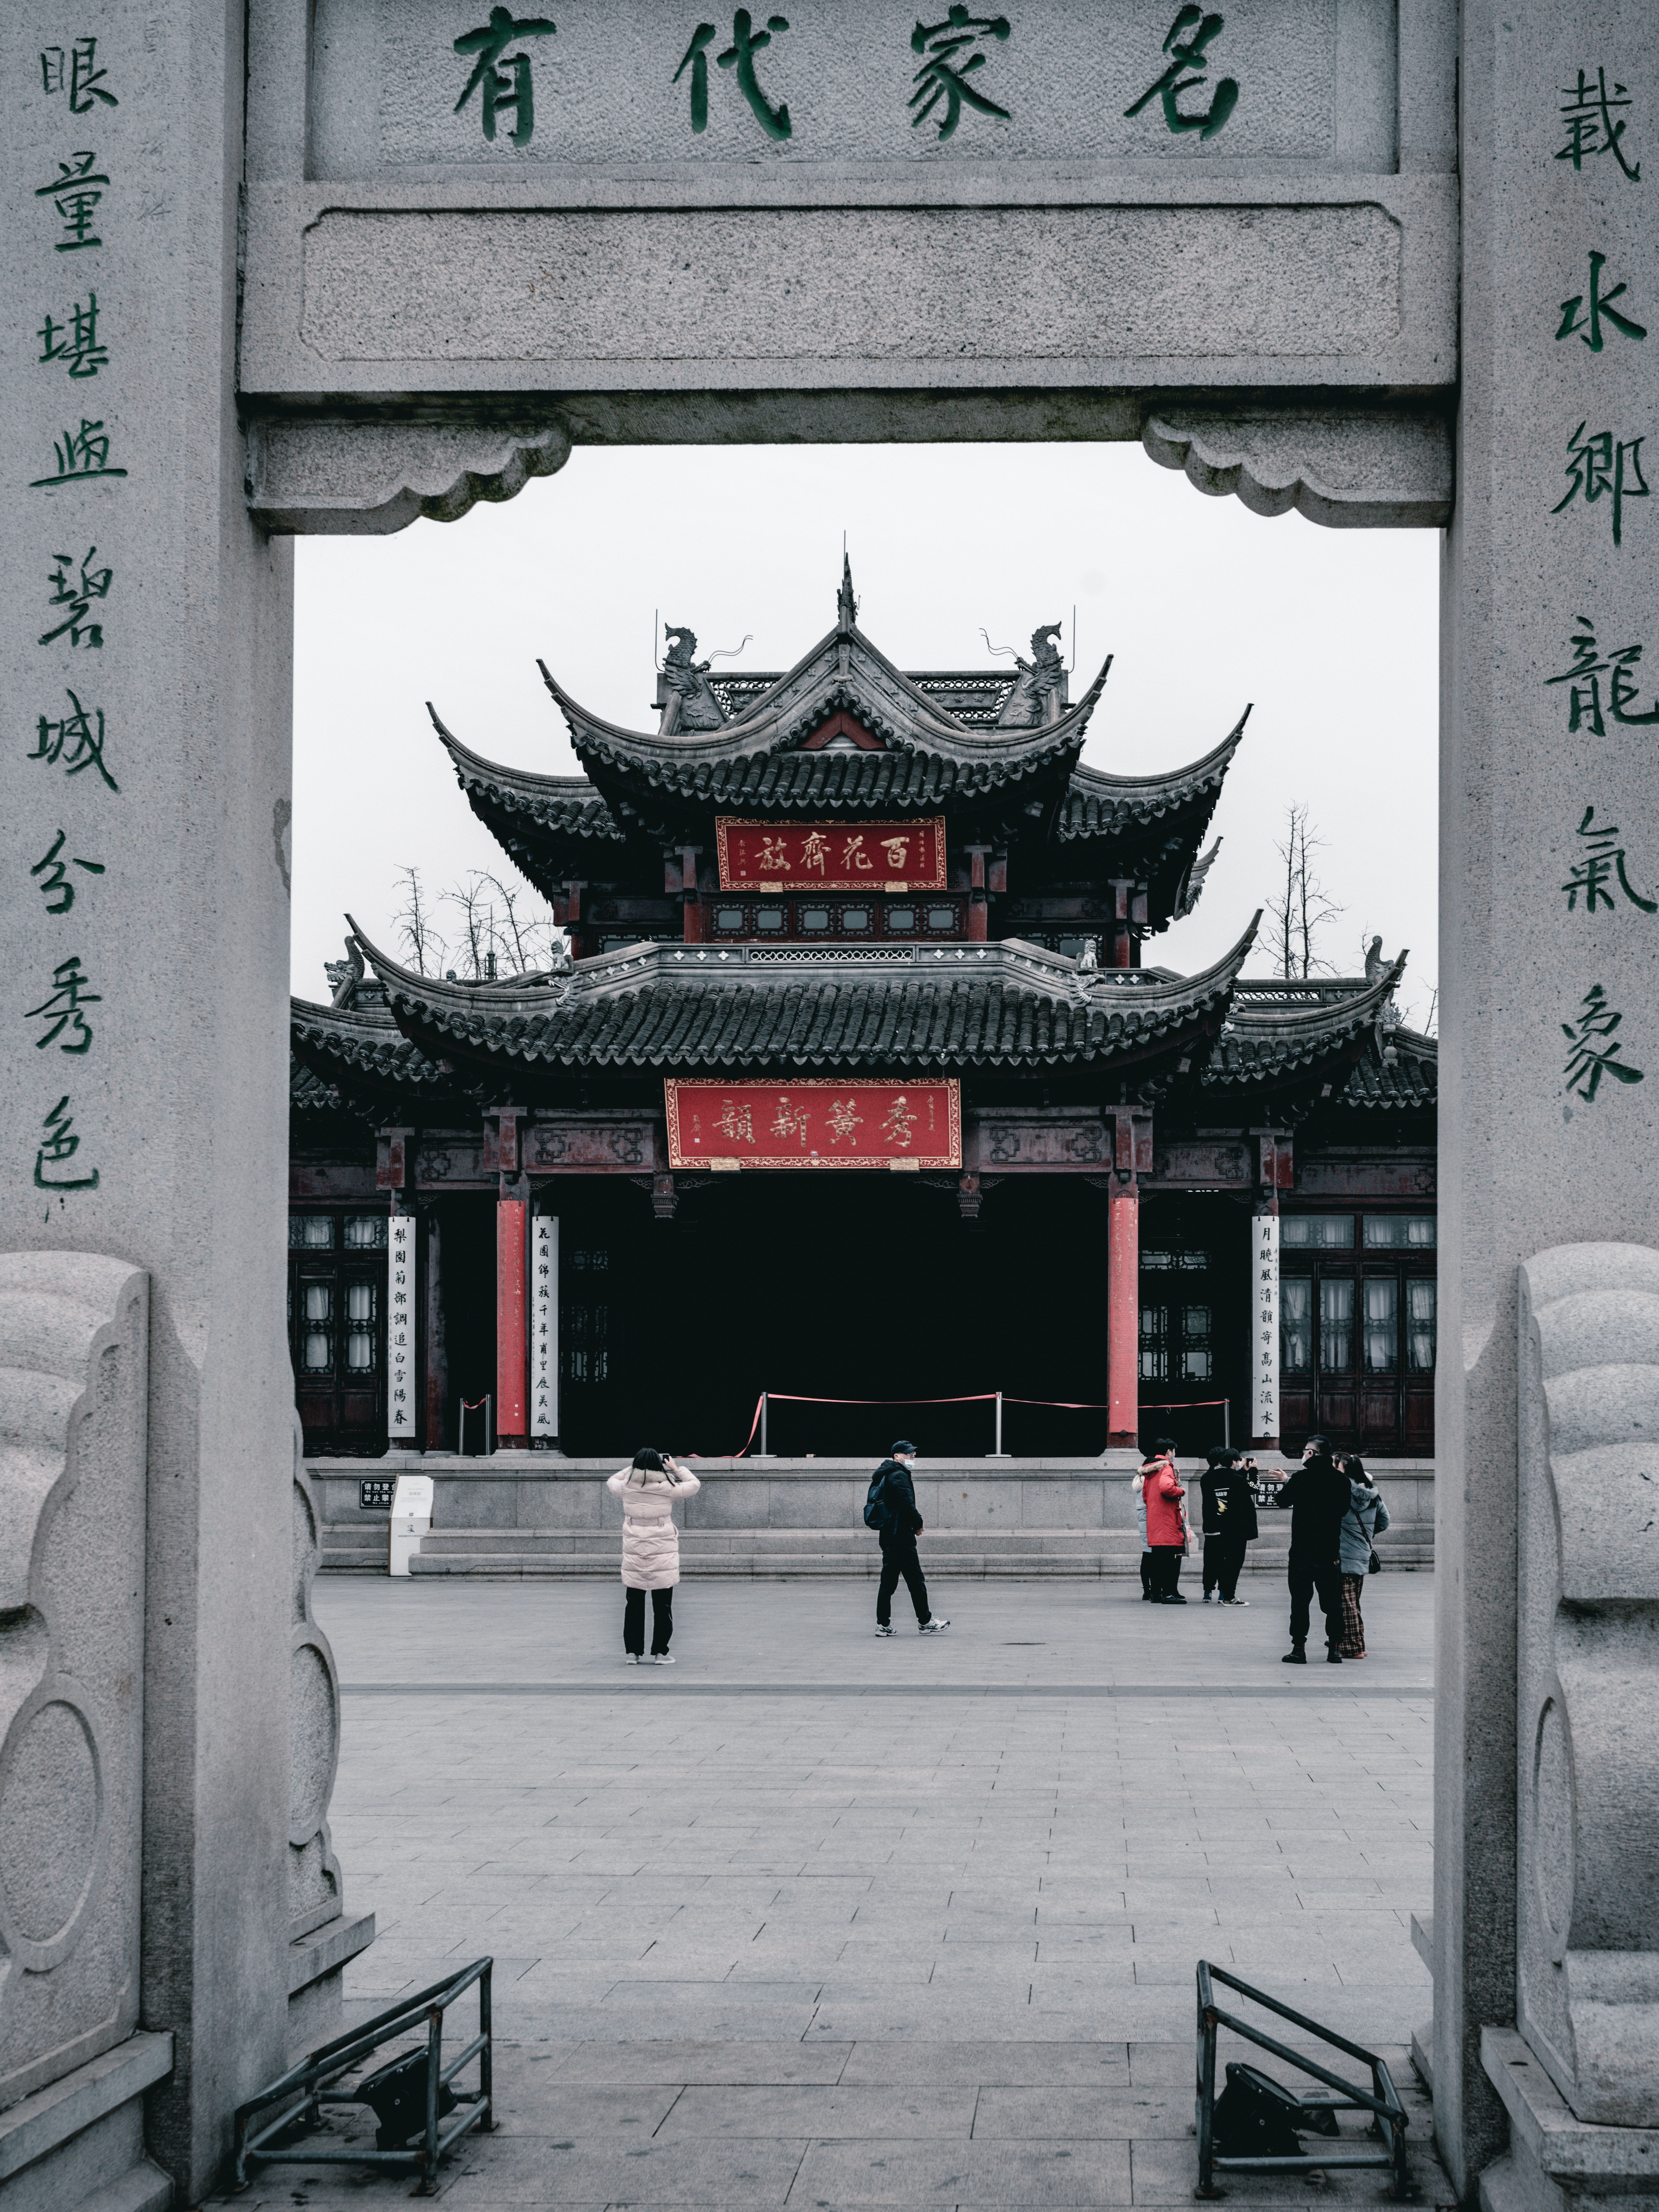 The front of a Chinese building with arches and people walking around. - Chinese